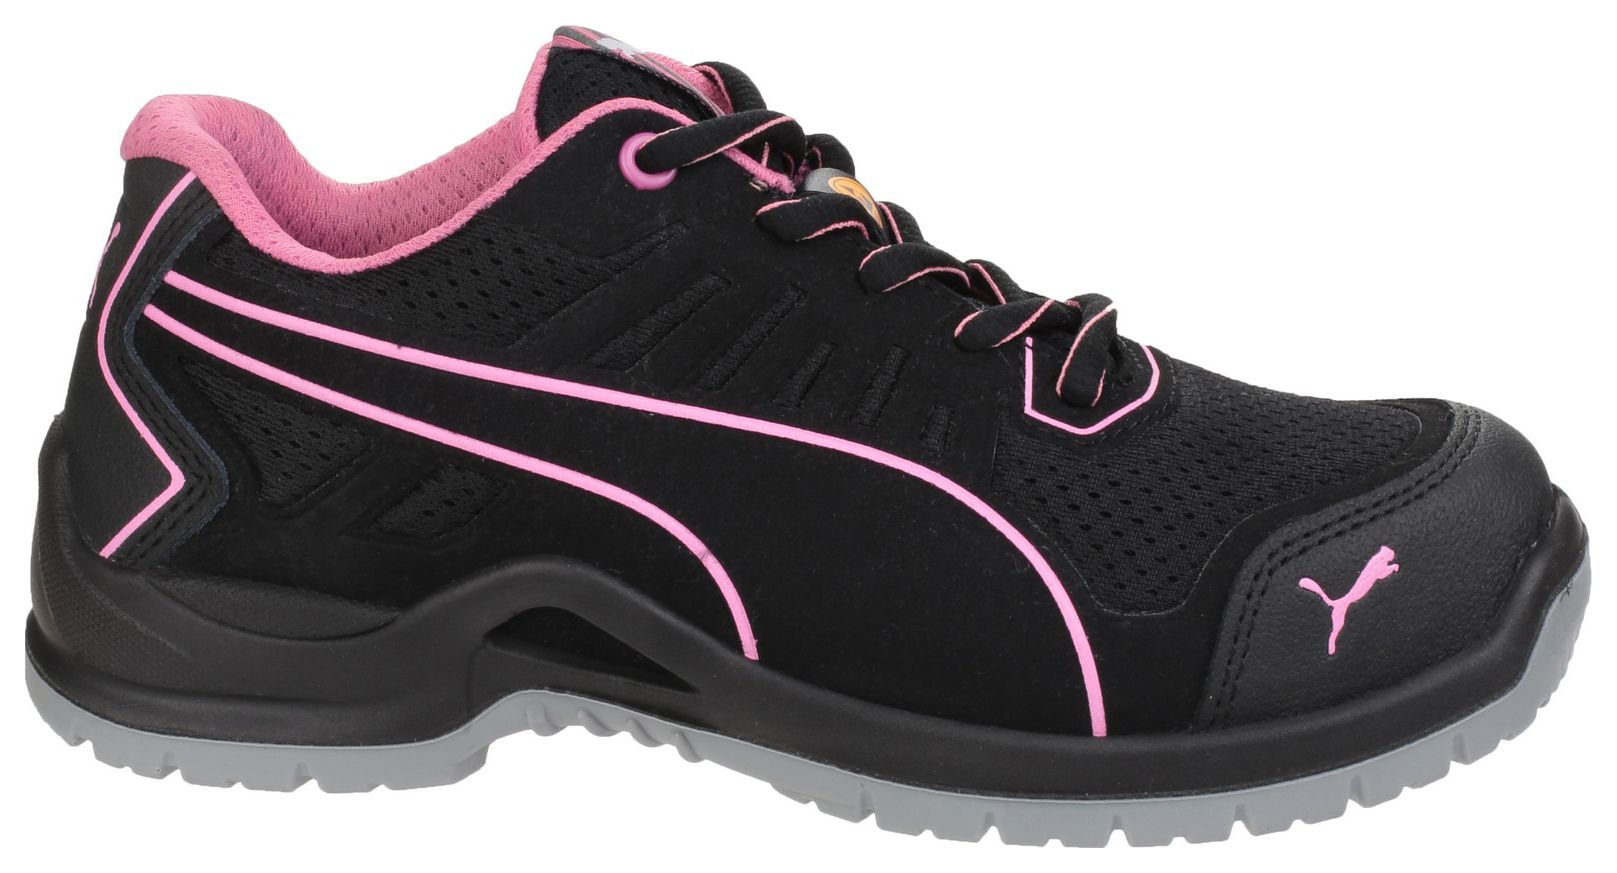 Puma Fuse Technic 644110 Womens Safety Trainers Black - Size 36